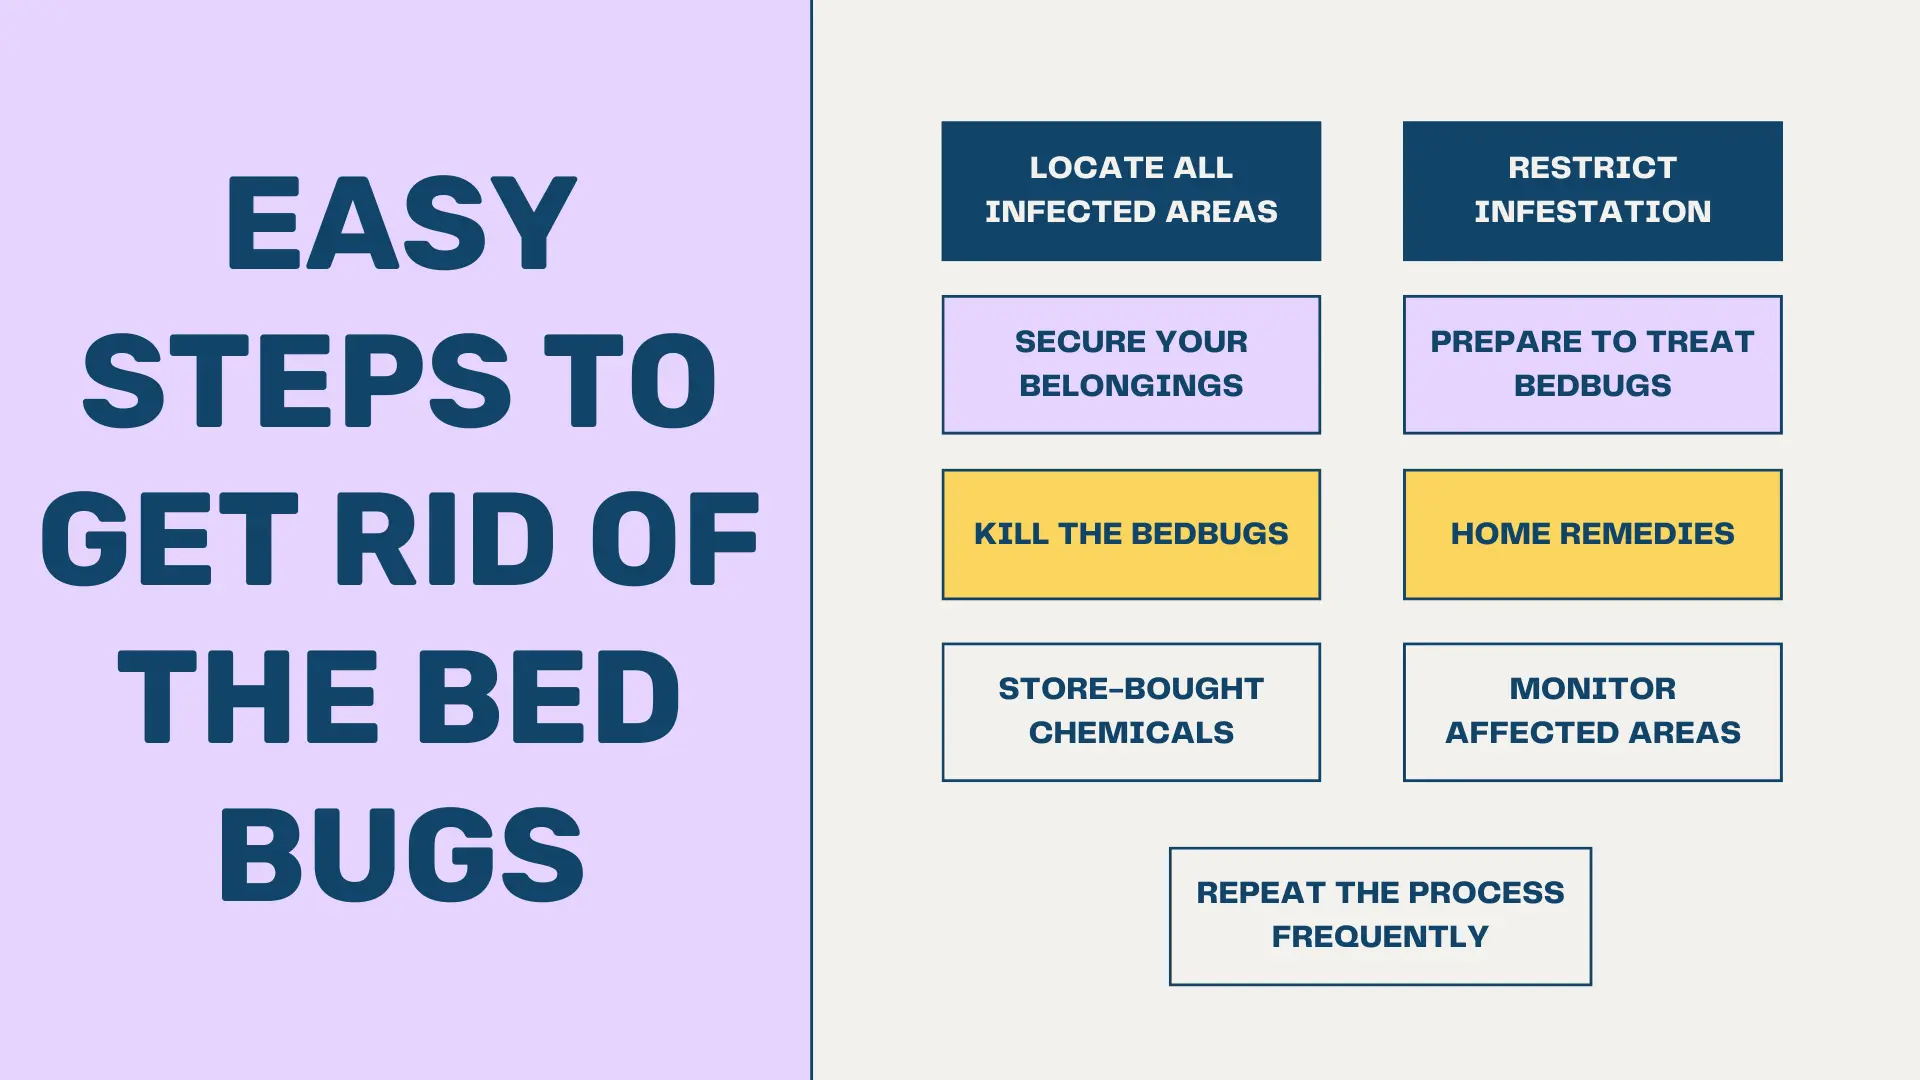 Easy Steps to Get Rid of the Bed Bugs